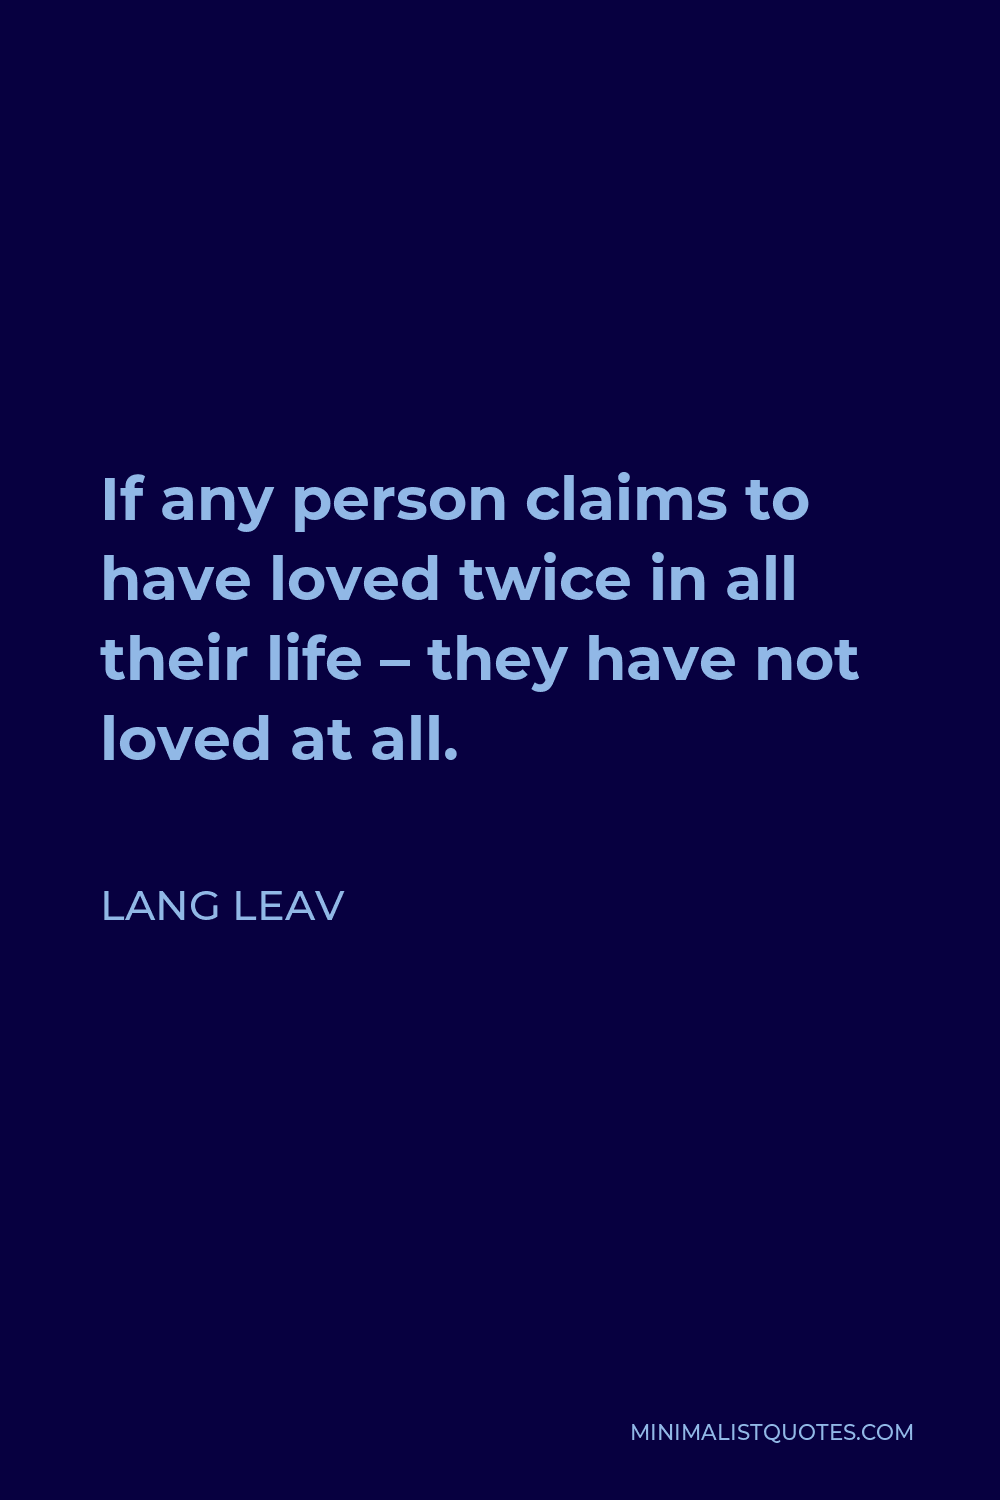 Lang Leav Quote - If any person claims to have loved twice in all their life – they have not loved at all.